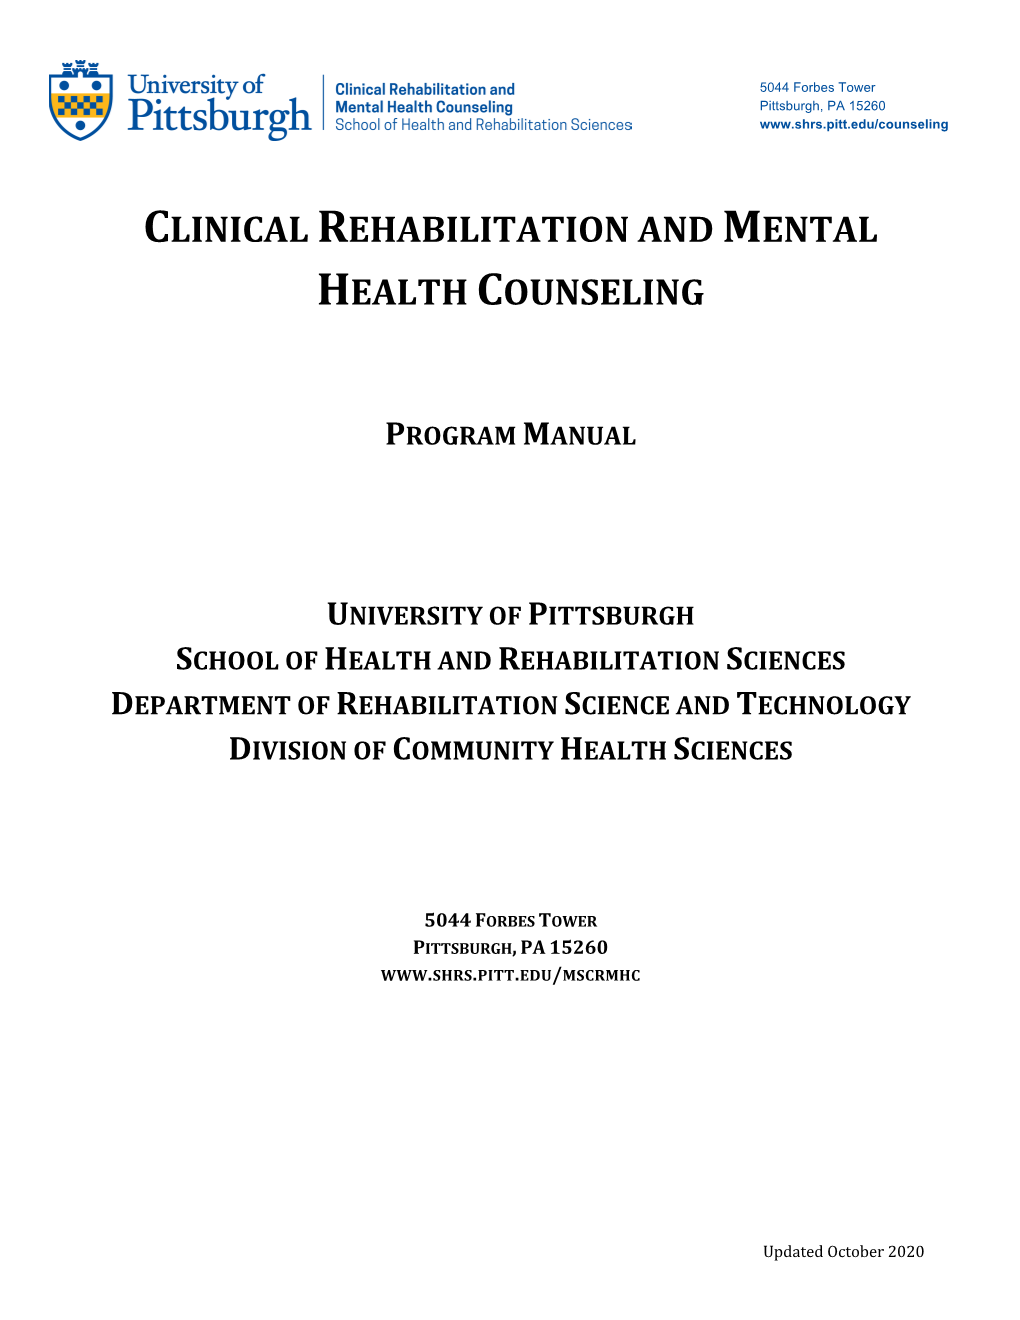 Clinical Rehabilitation and Mental Health Counseling Program Manual